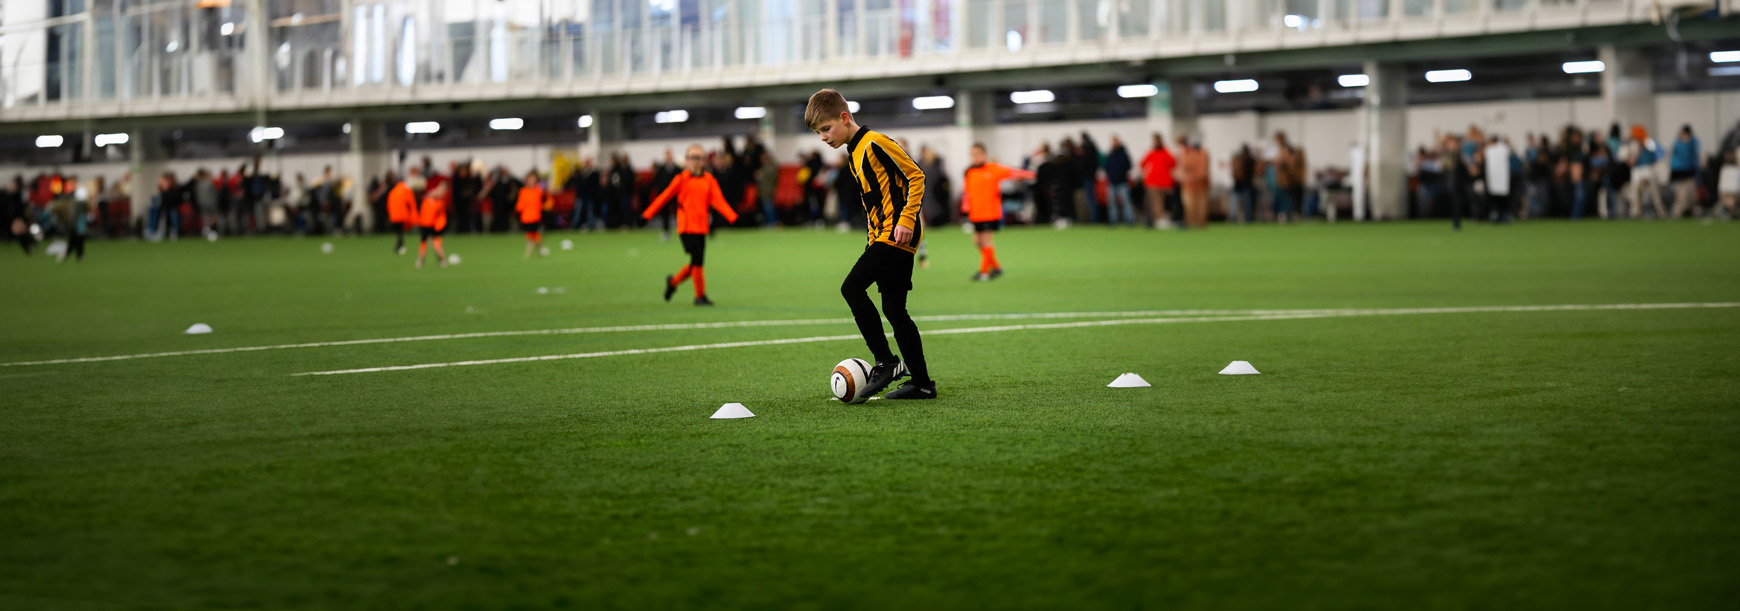 A young player controls the ball with the inside of his left foot and keeps it close to him during a match on an indoor 3G pitch.